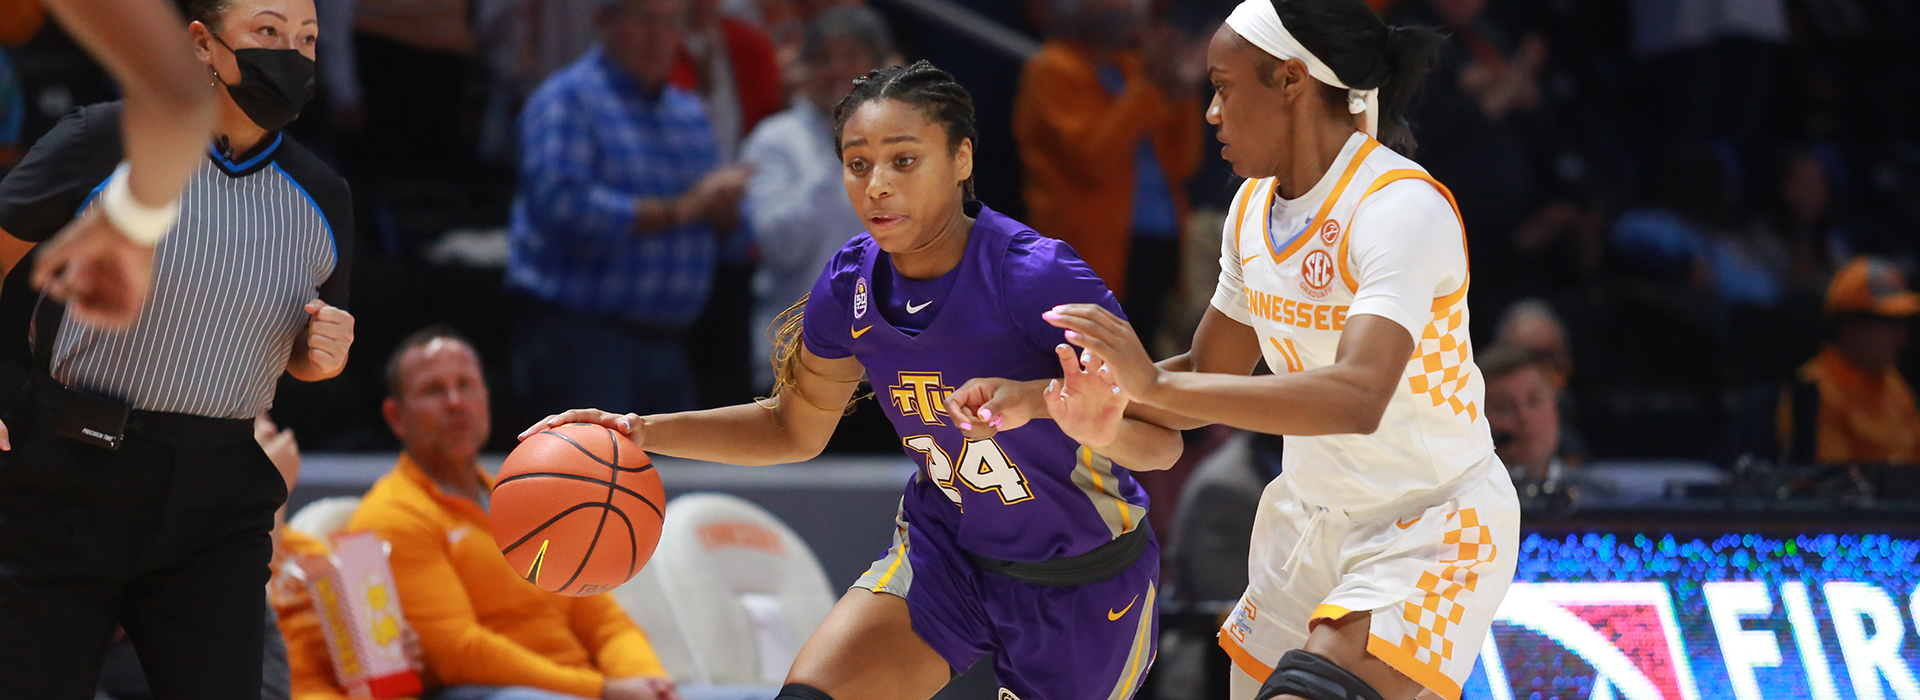 Non-conference slate announced for Tech women's basketball in 2022-23